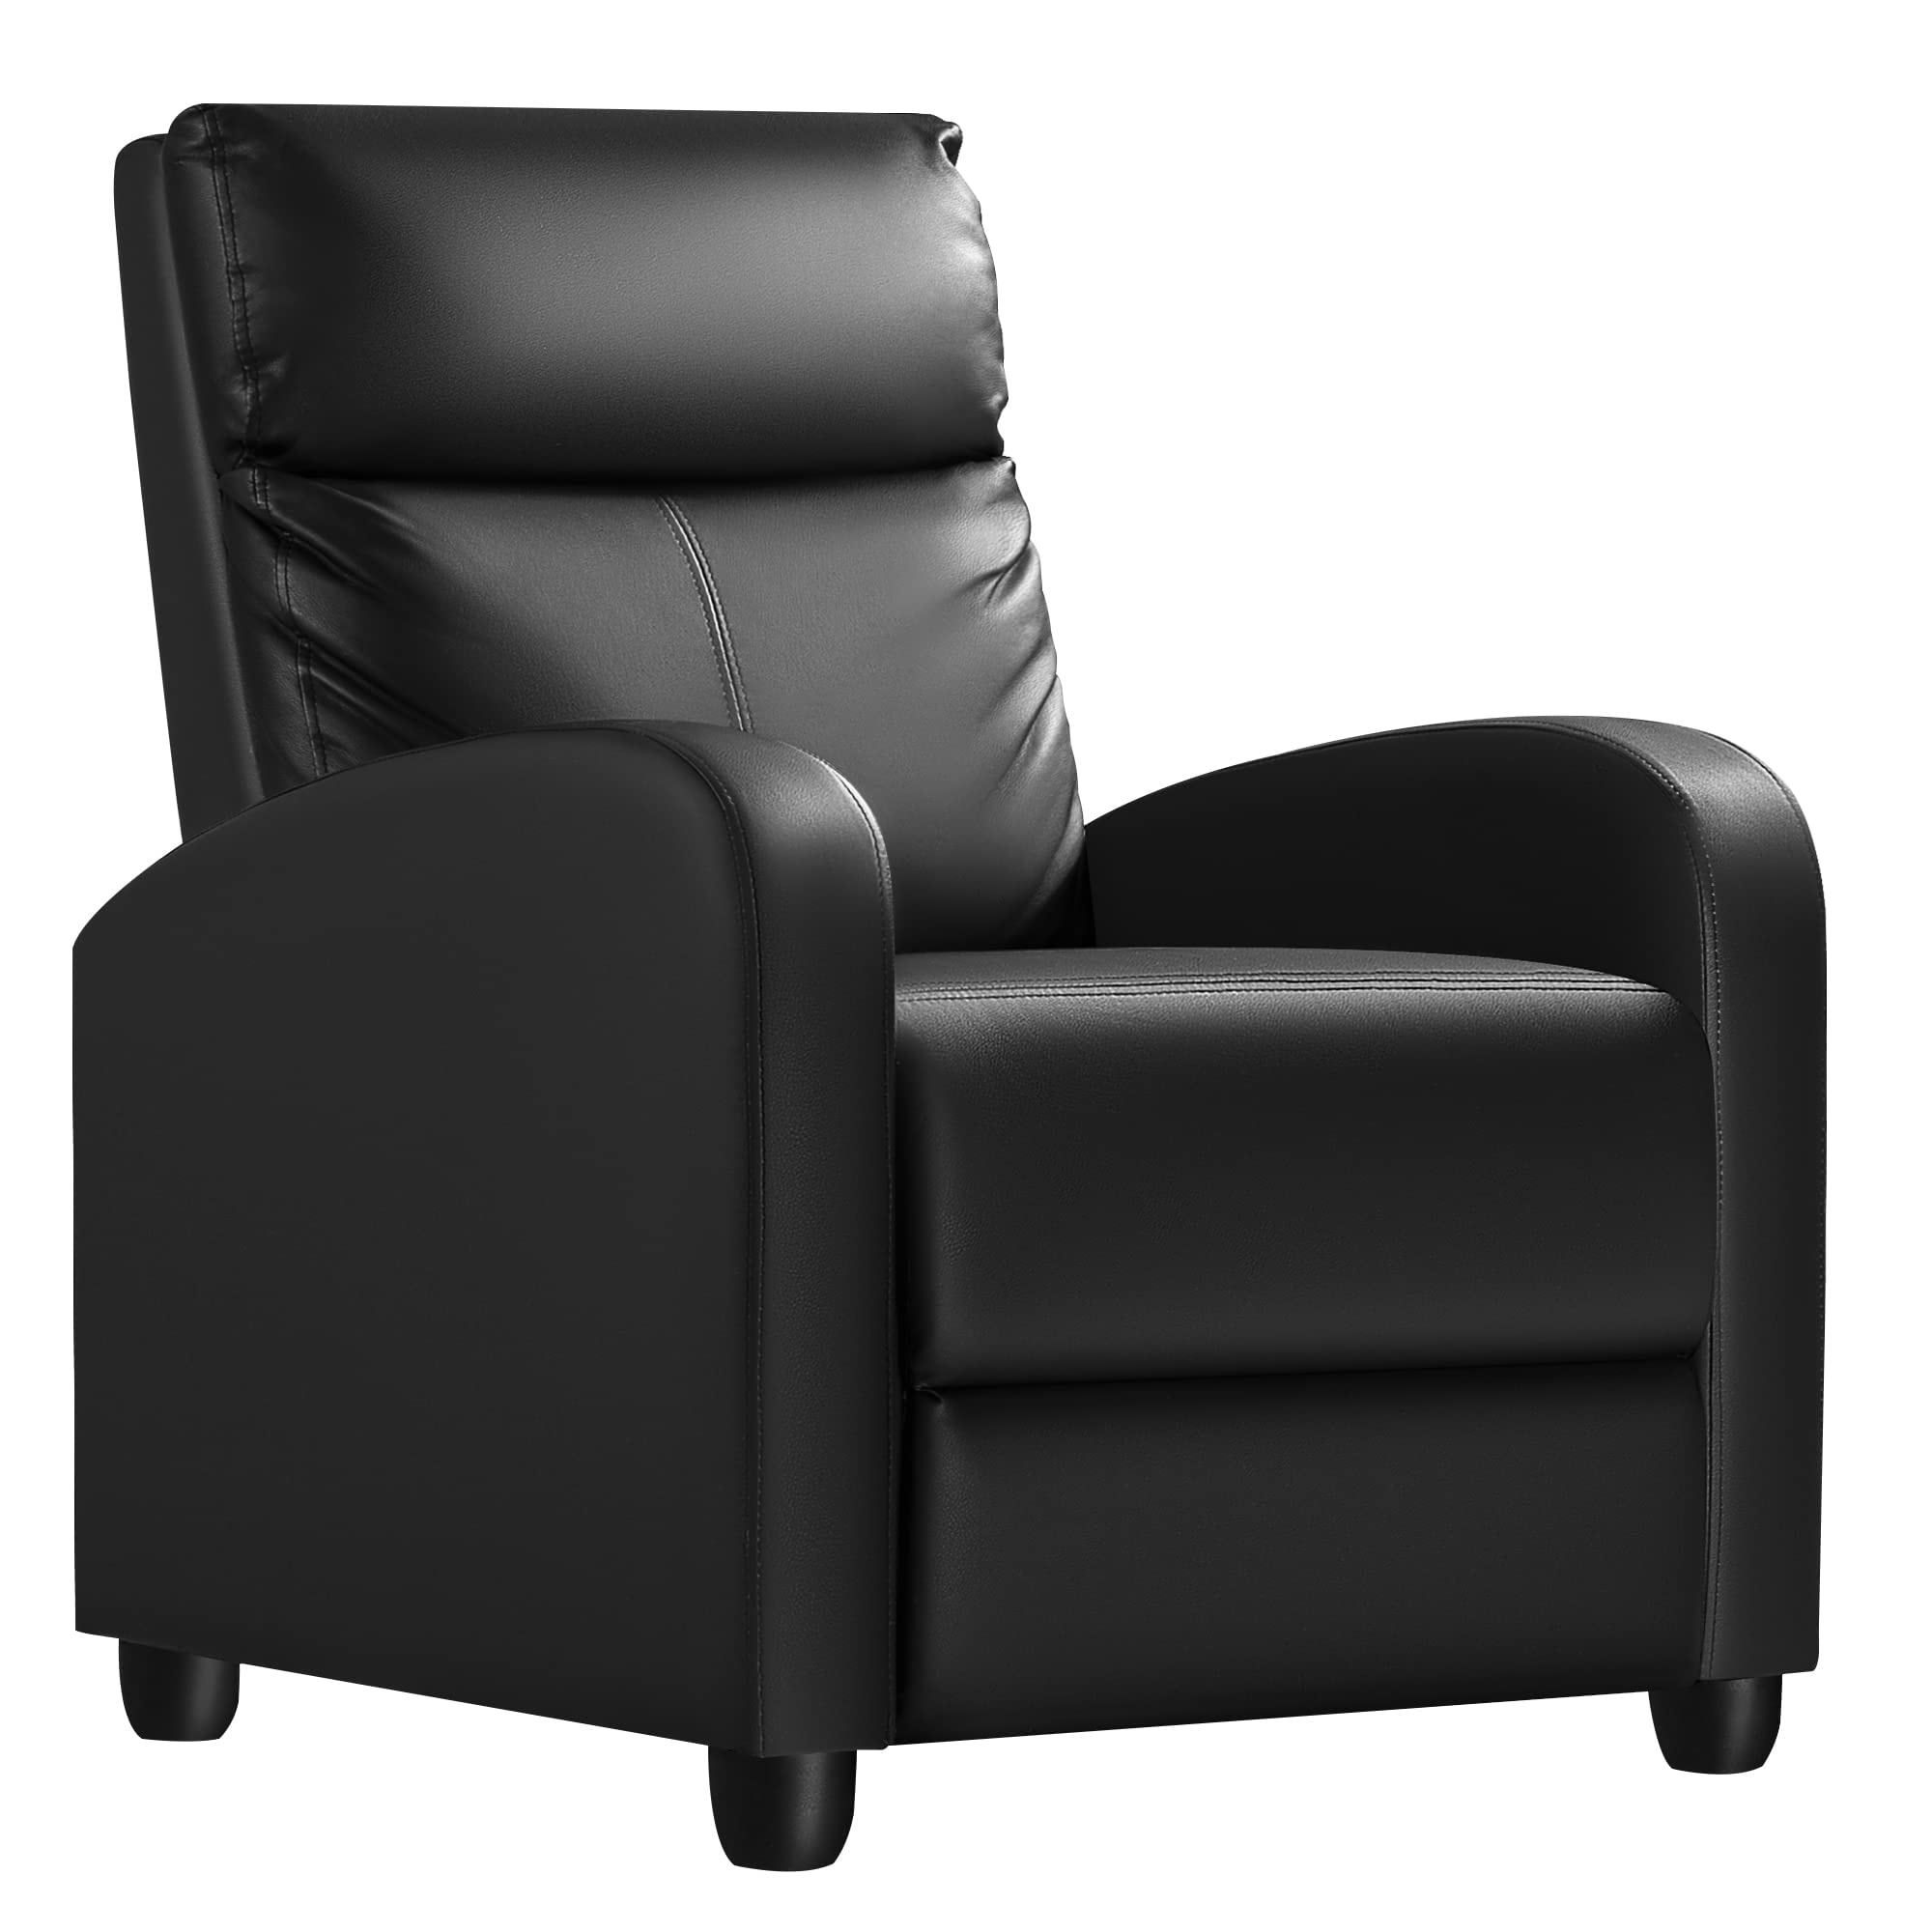 Recliner Chair  Recliner Sofa Pu Leather For Adults  Recliners Home Theater Seating With Lumbar Support  Reclining Sofa Chair